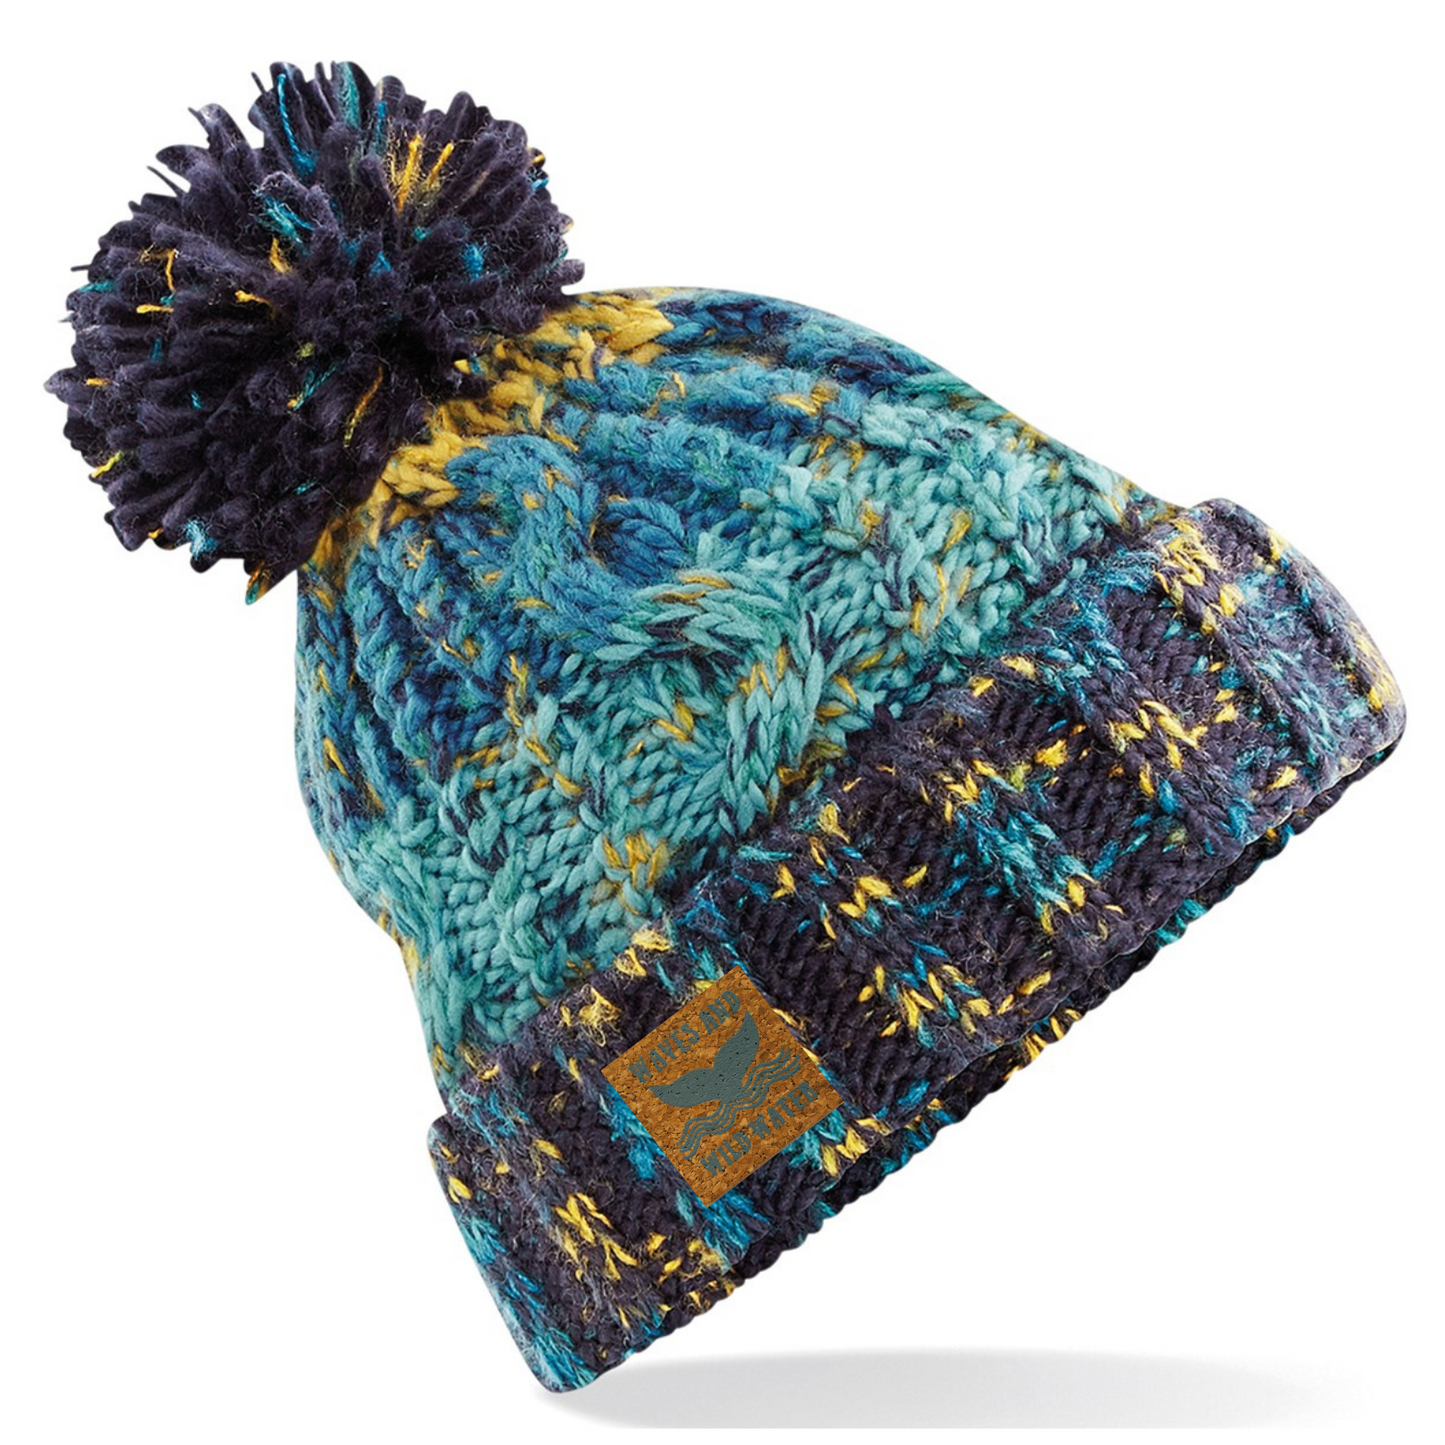 This fabulous knitted hat is shown in varying shades of blue and reminds us of the colours of the ocean. It has a thick fold up cuff for extra cosiness and is topped off with a woolly pom pom. We love to pop this hat on after a cold water dip or wild swim.